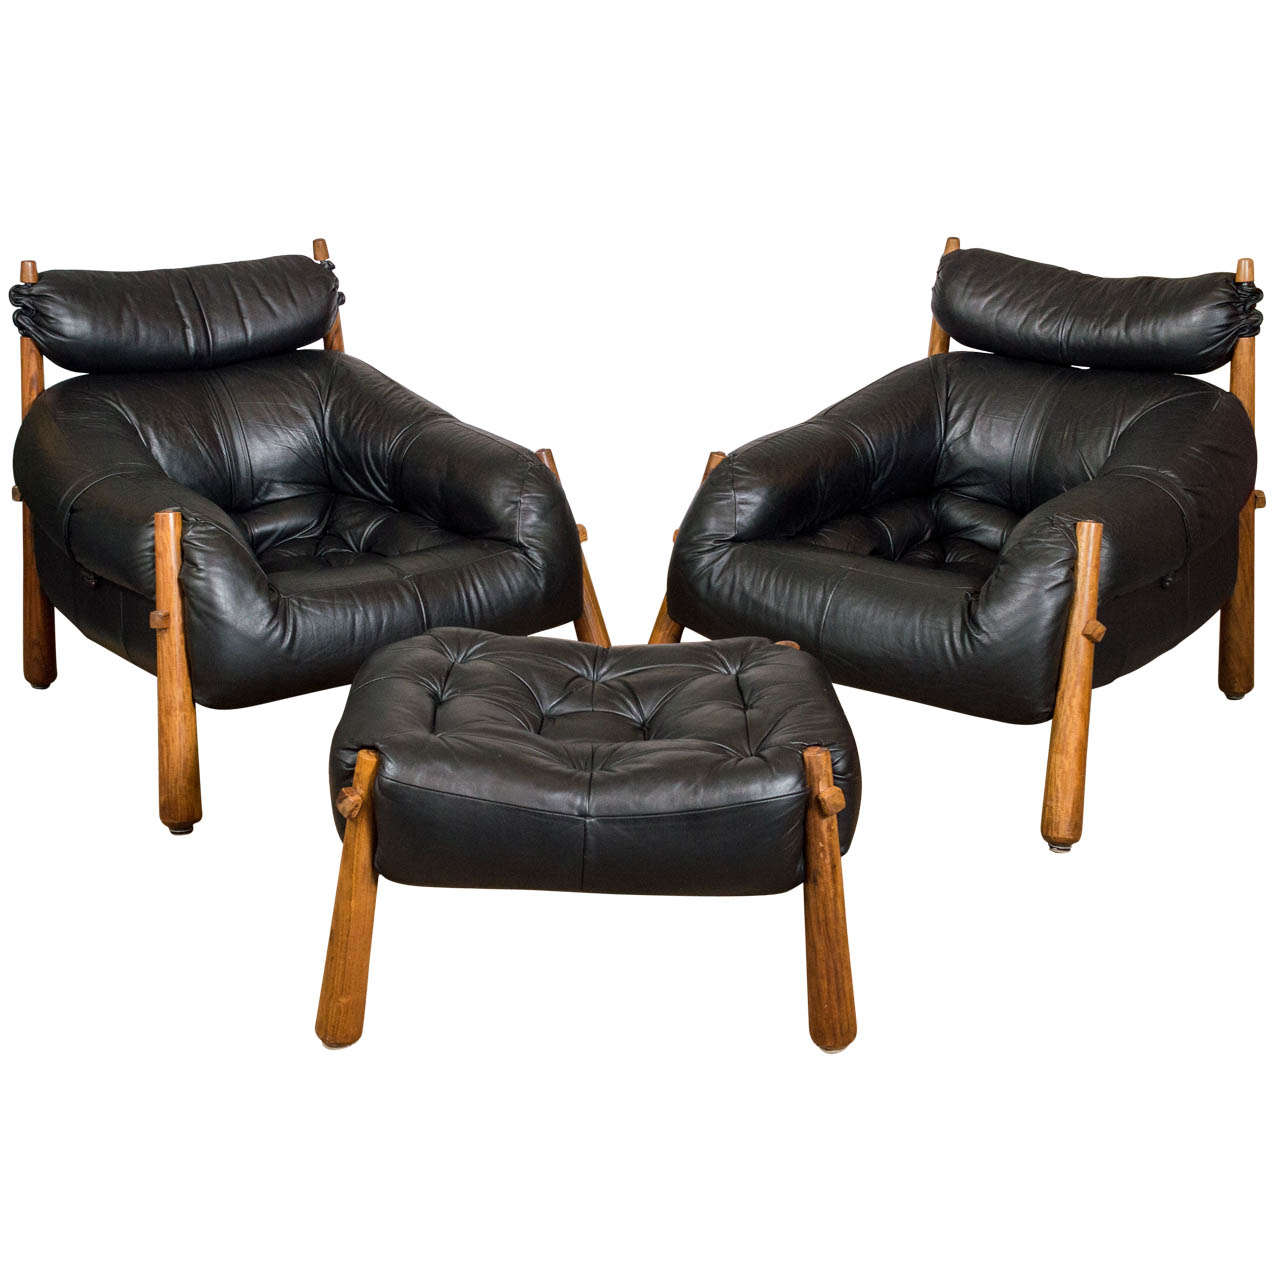 Pair of Black Leather and Rosewood Lounge Chairs with Ottoman by Percival Lafer